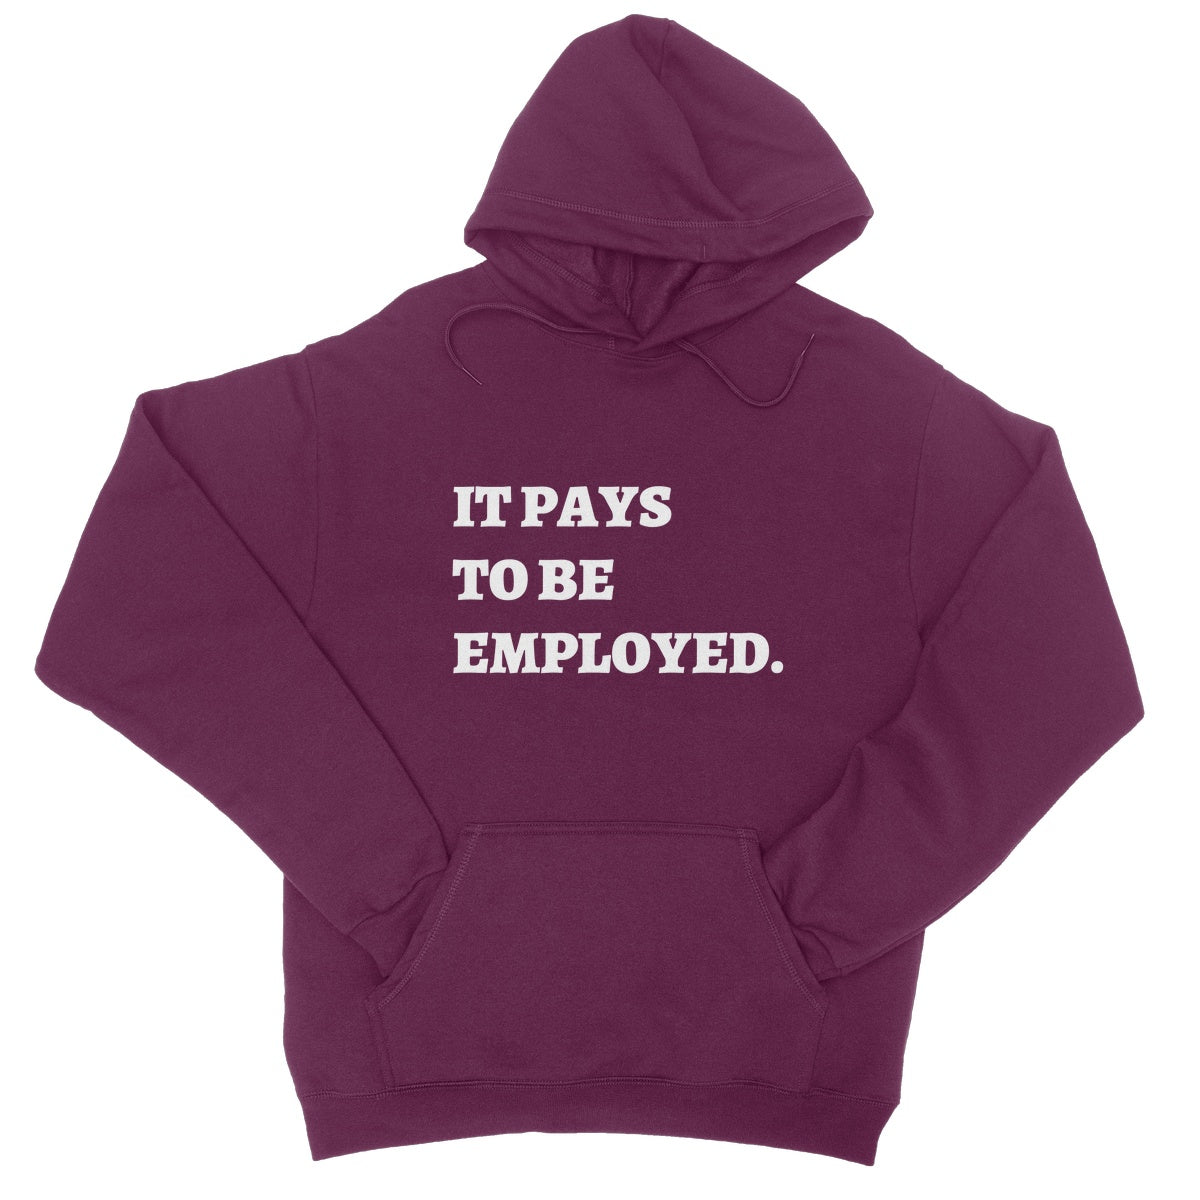 it pays to be employed hoodie purple